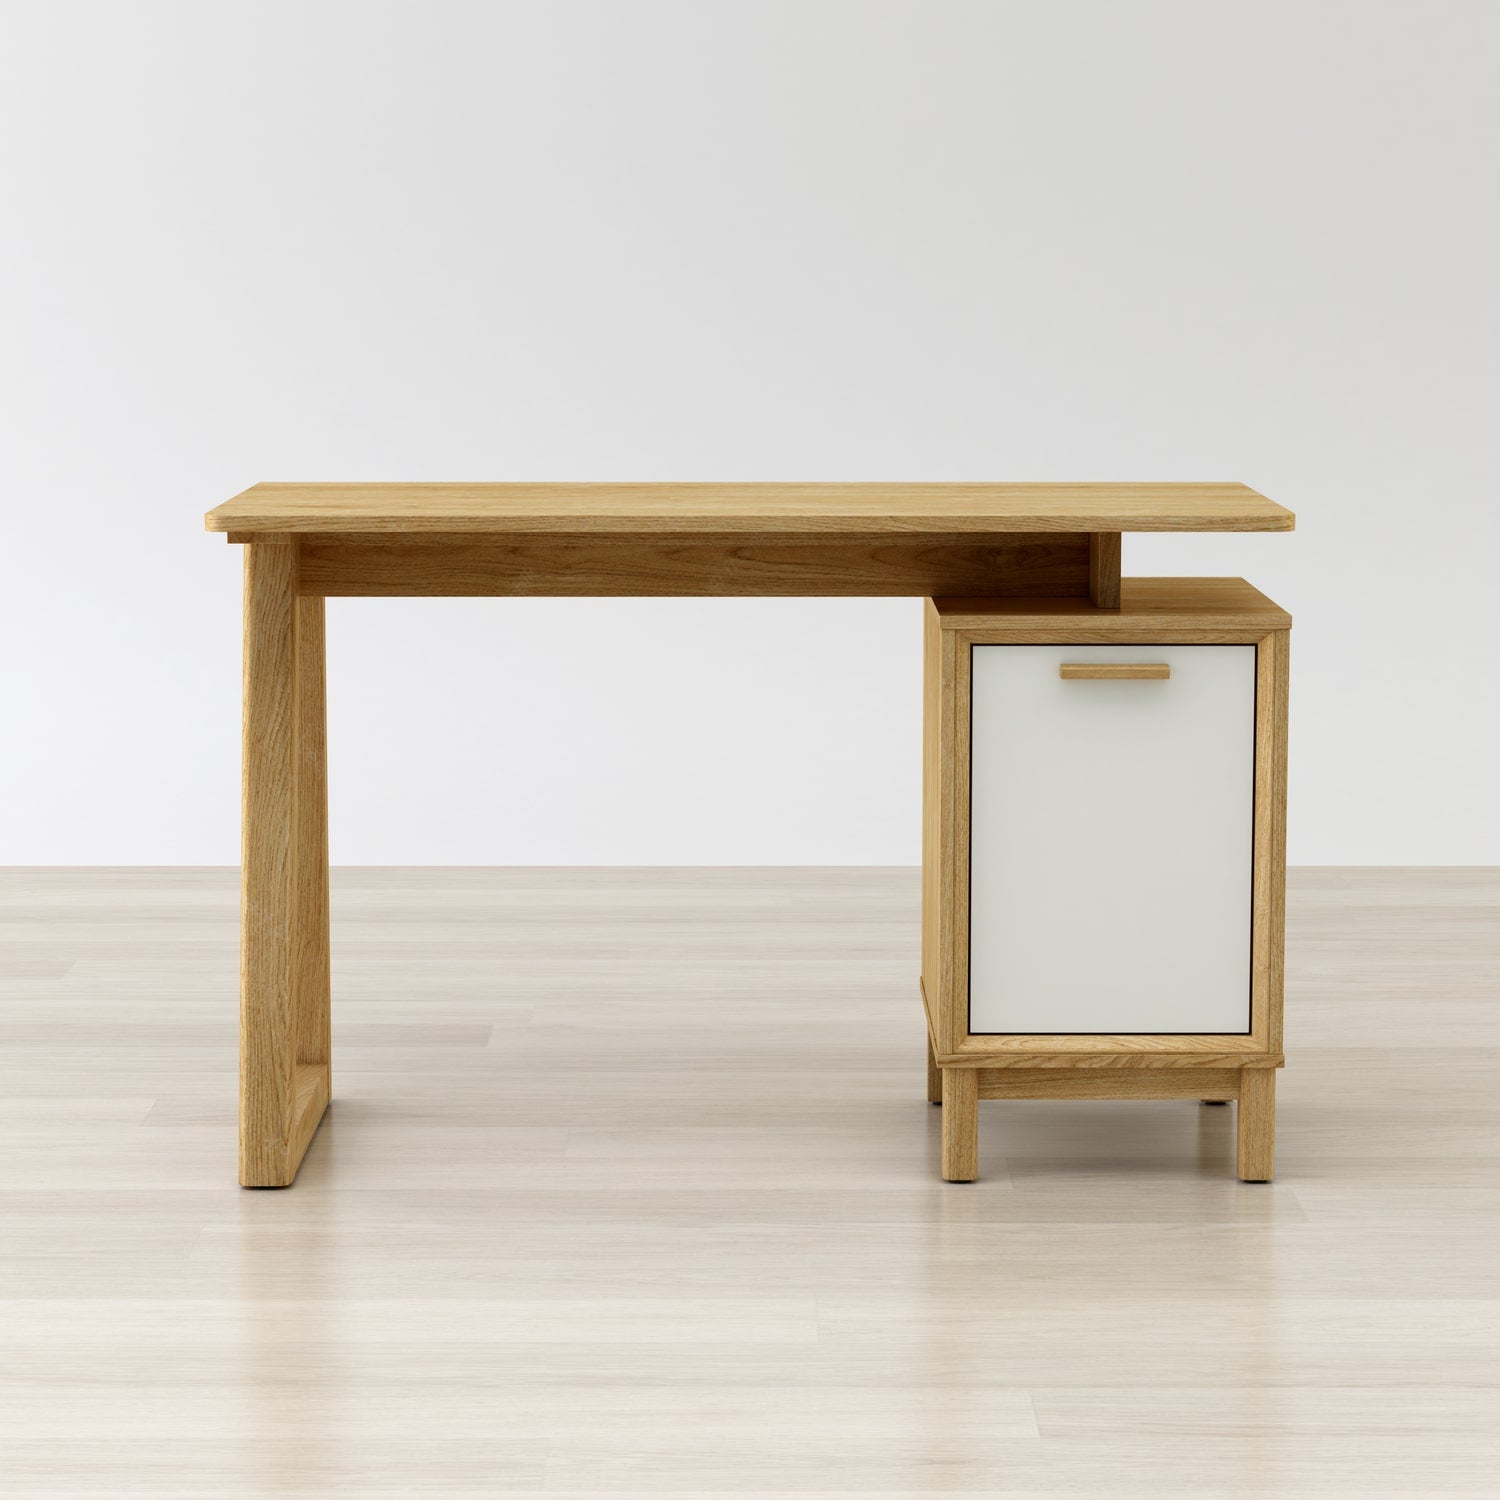 Anderson teak desk with wooden drawers